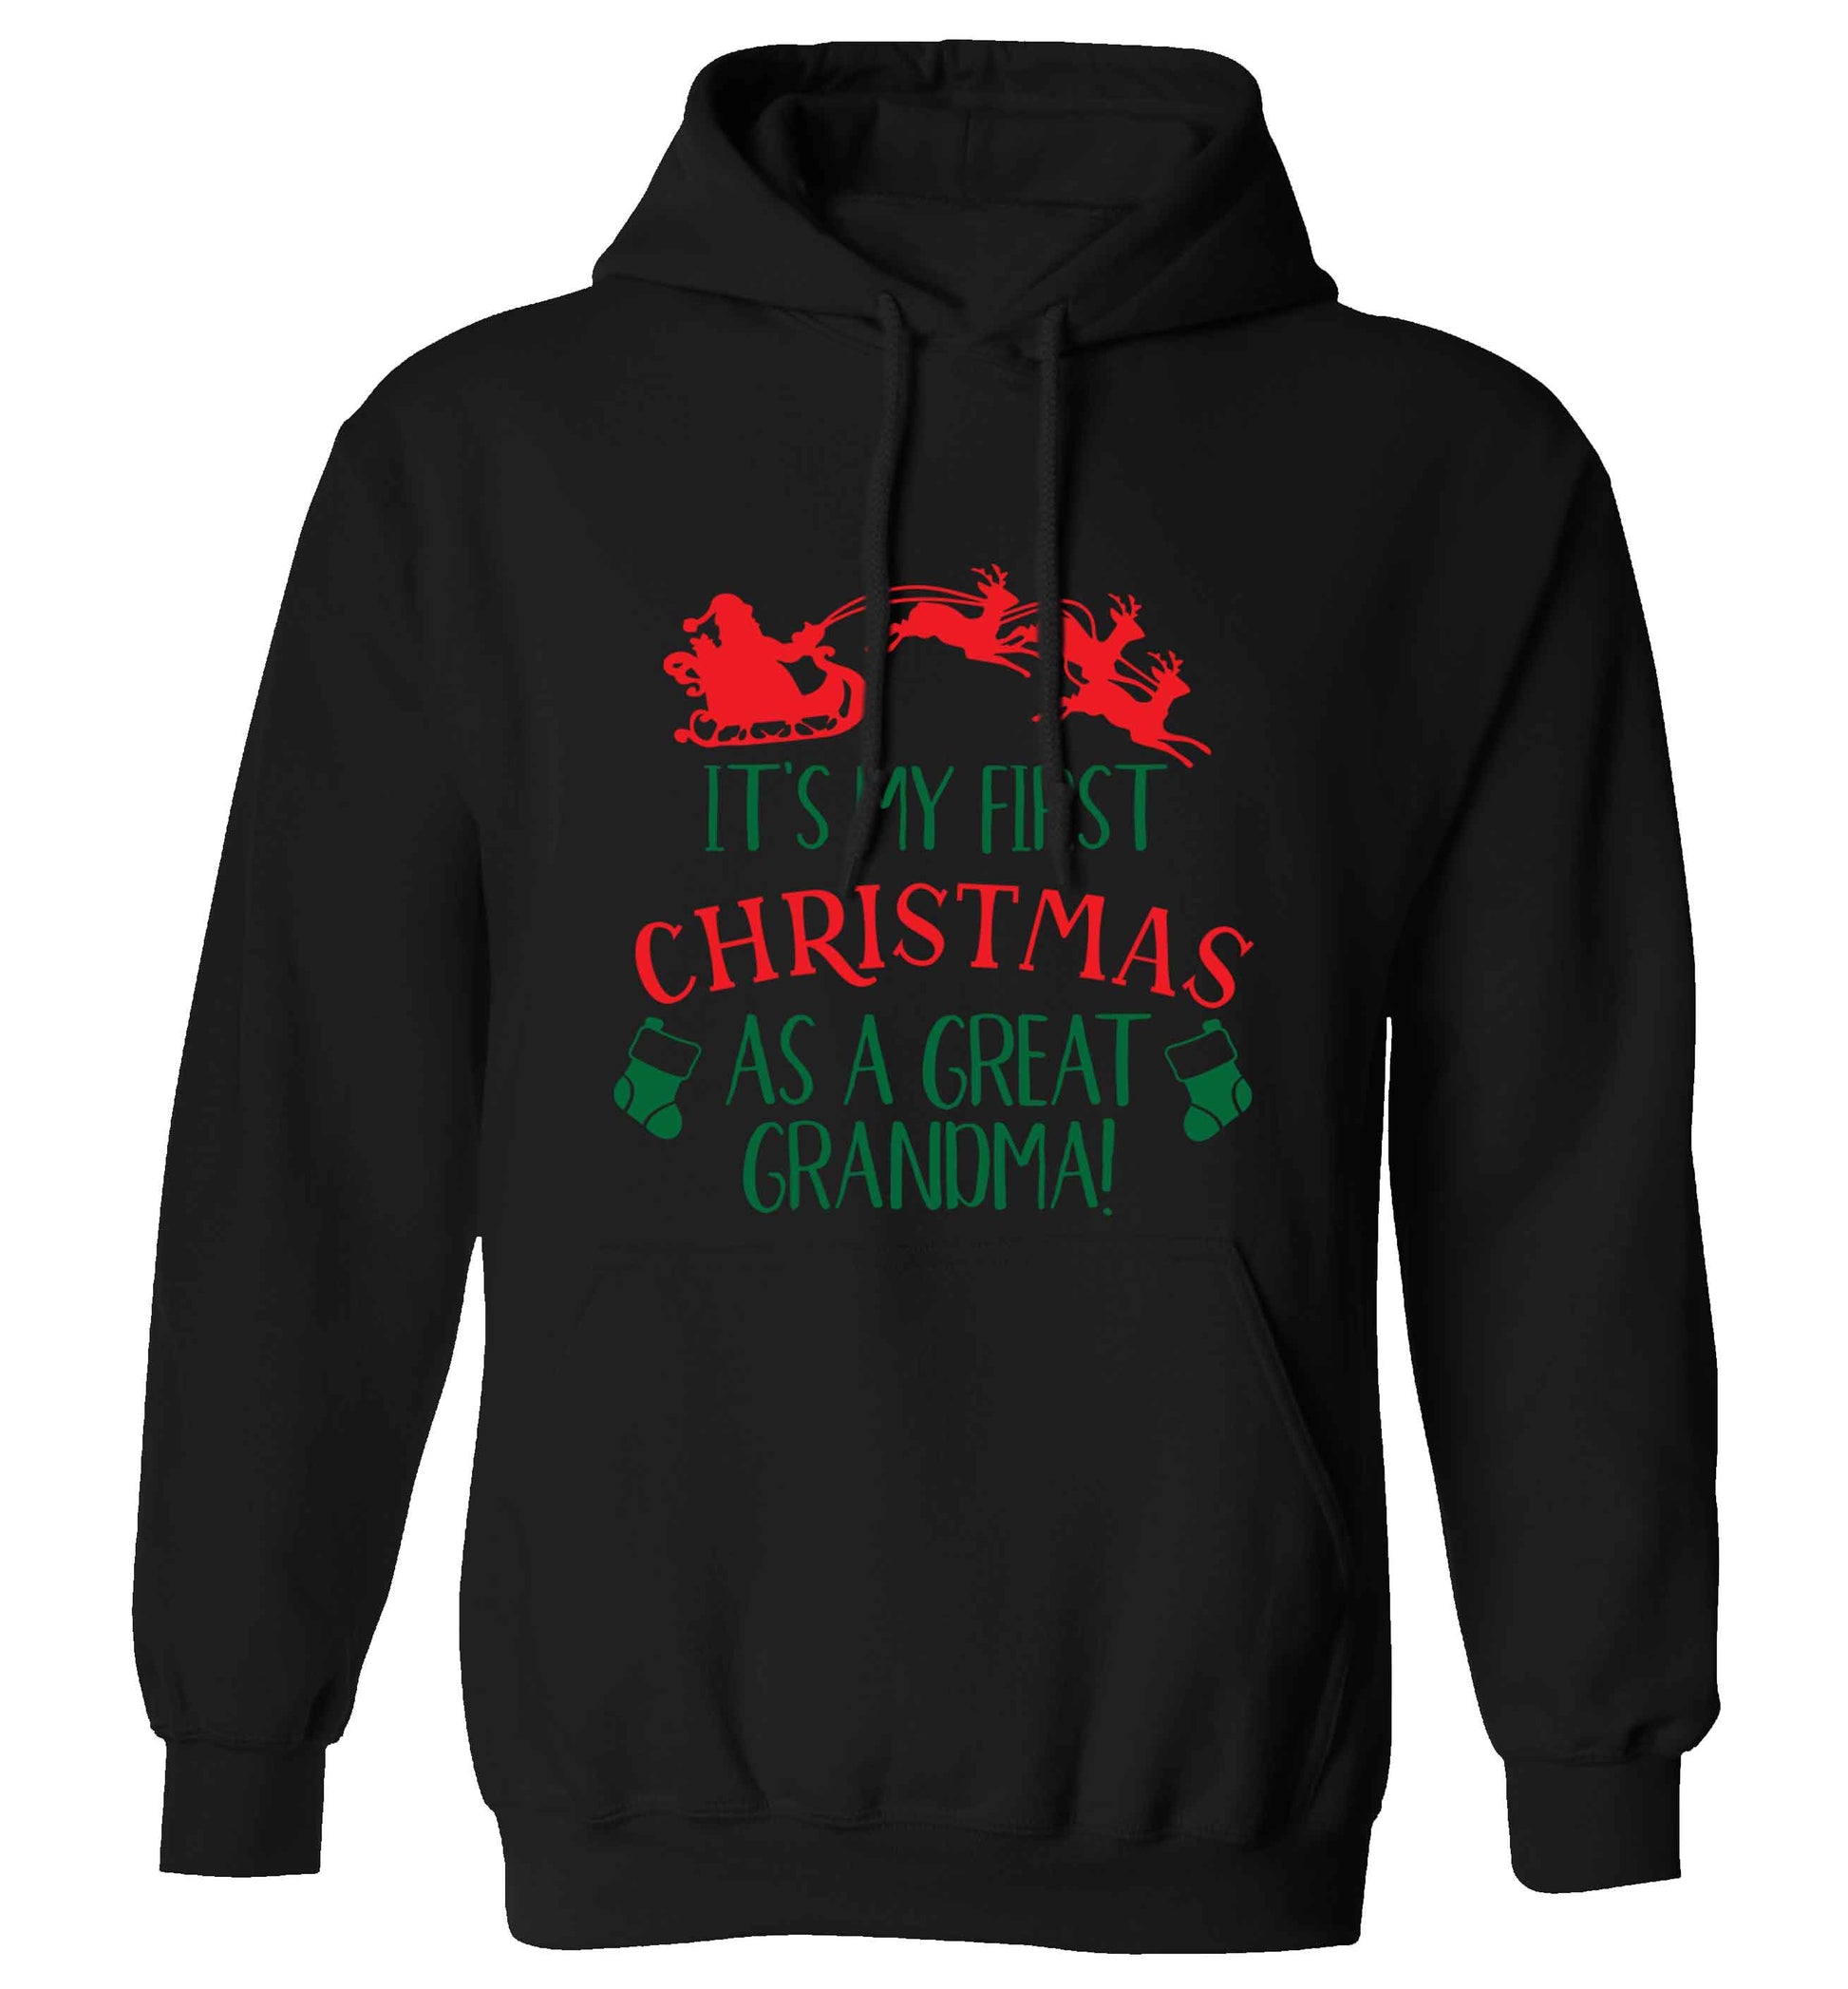 It's my first Christmas as a great grandma! adults unisex black hoodie 2XL